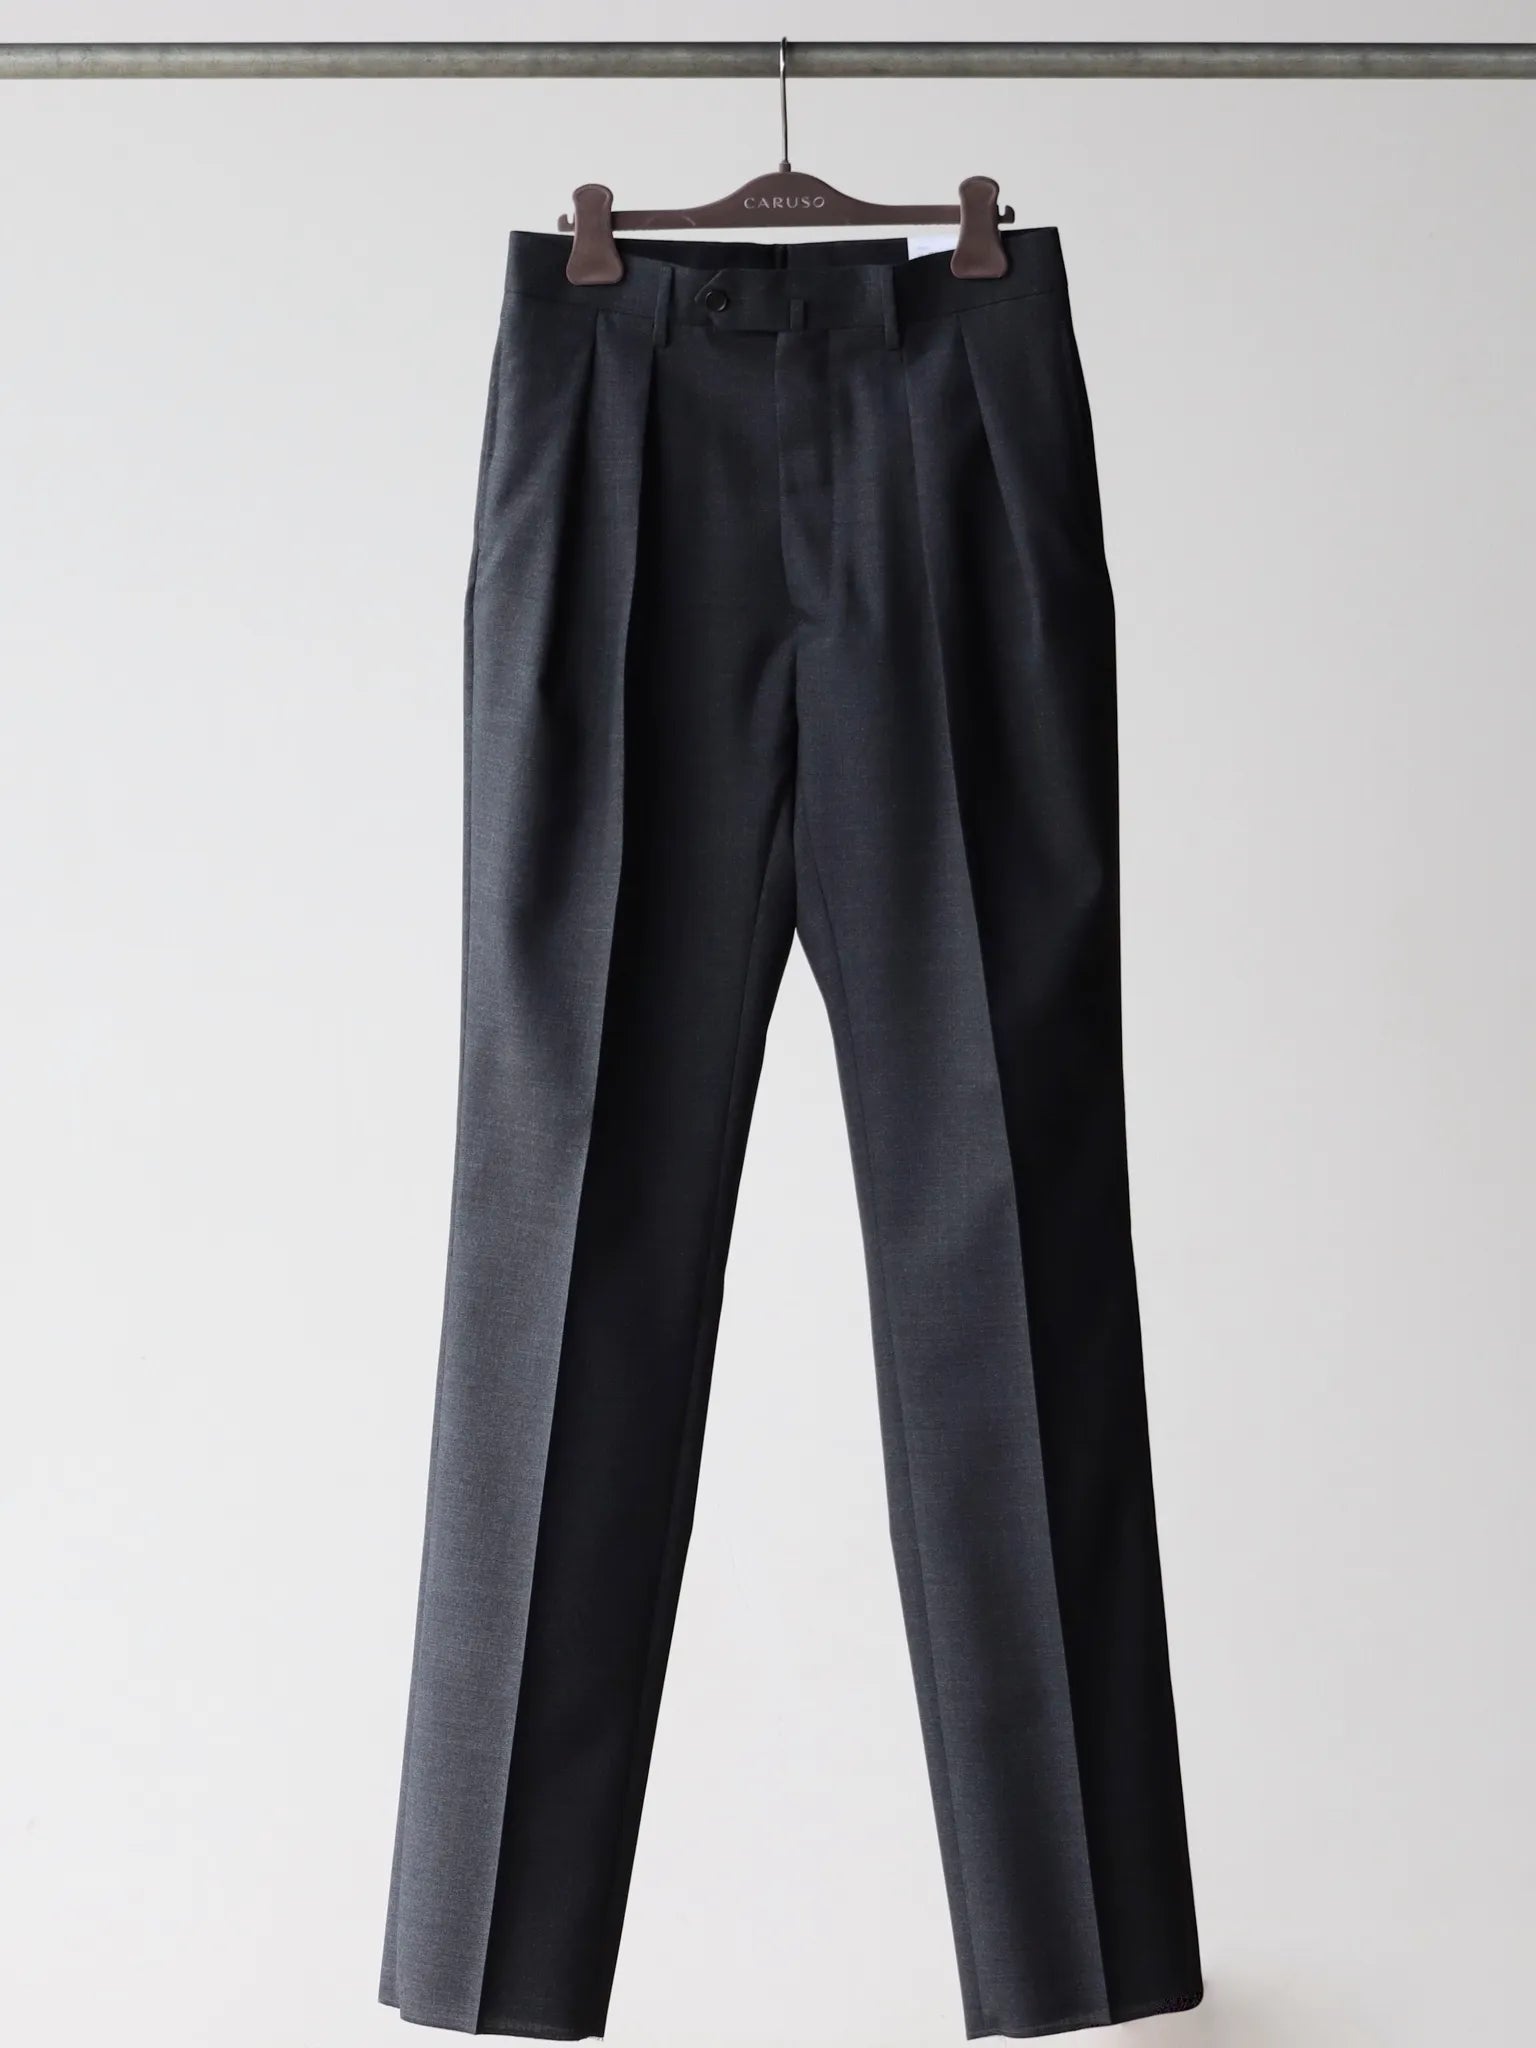 NEAT | CARUSO × NEAT Solid Trousers GRAY